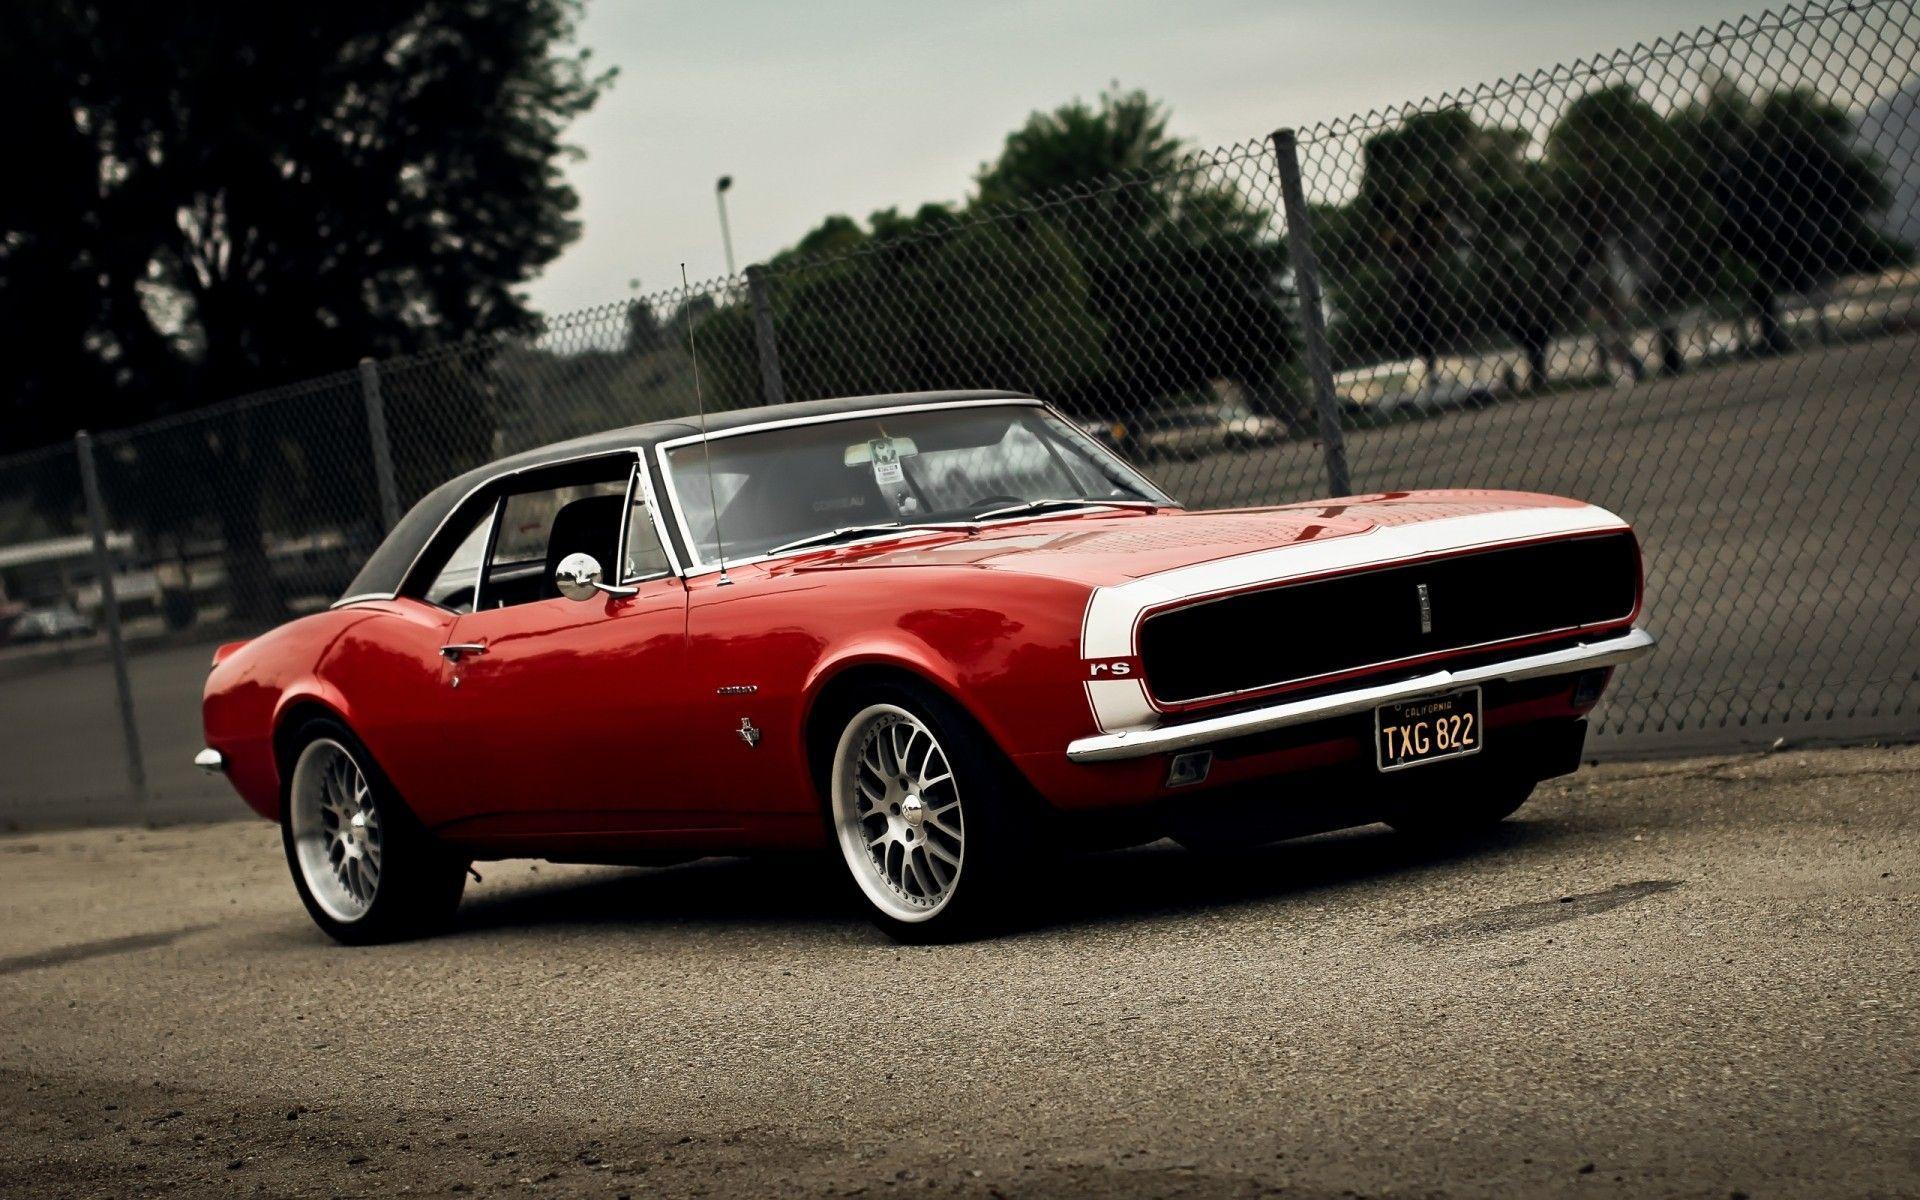 Wallpaper Of Muscle Cars